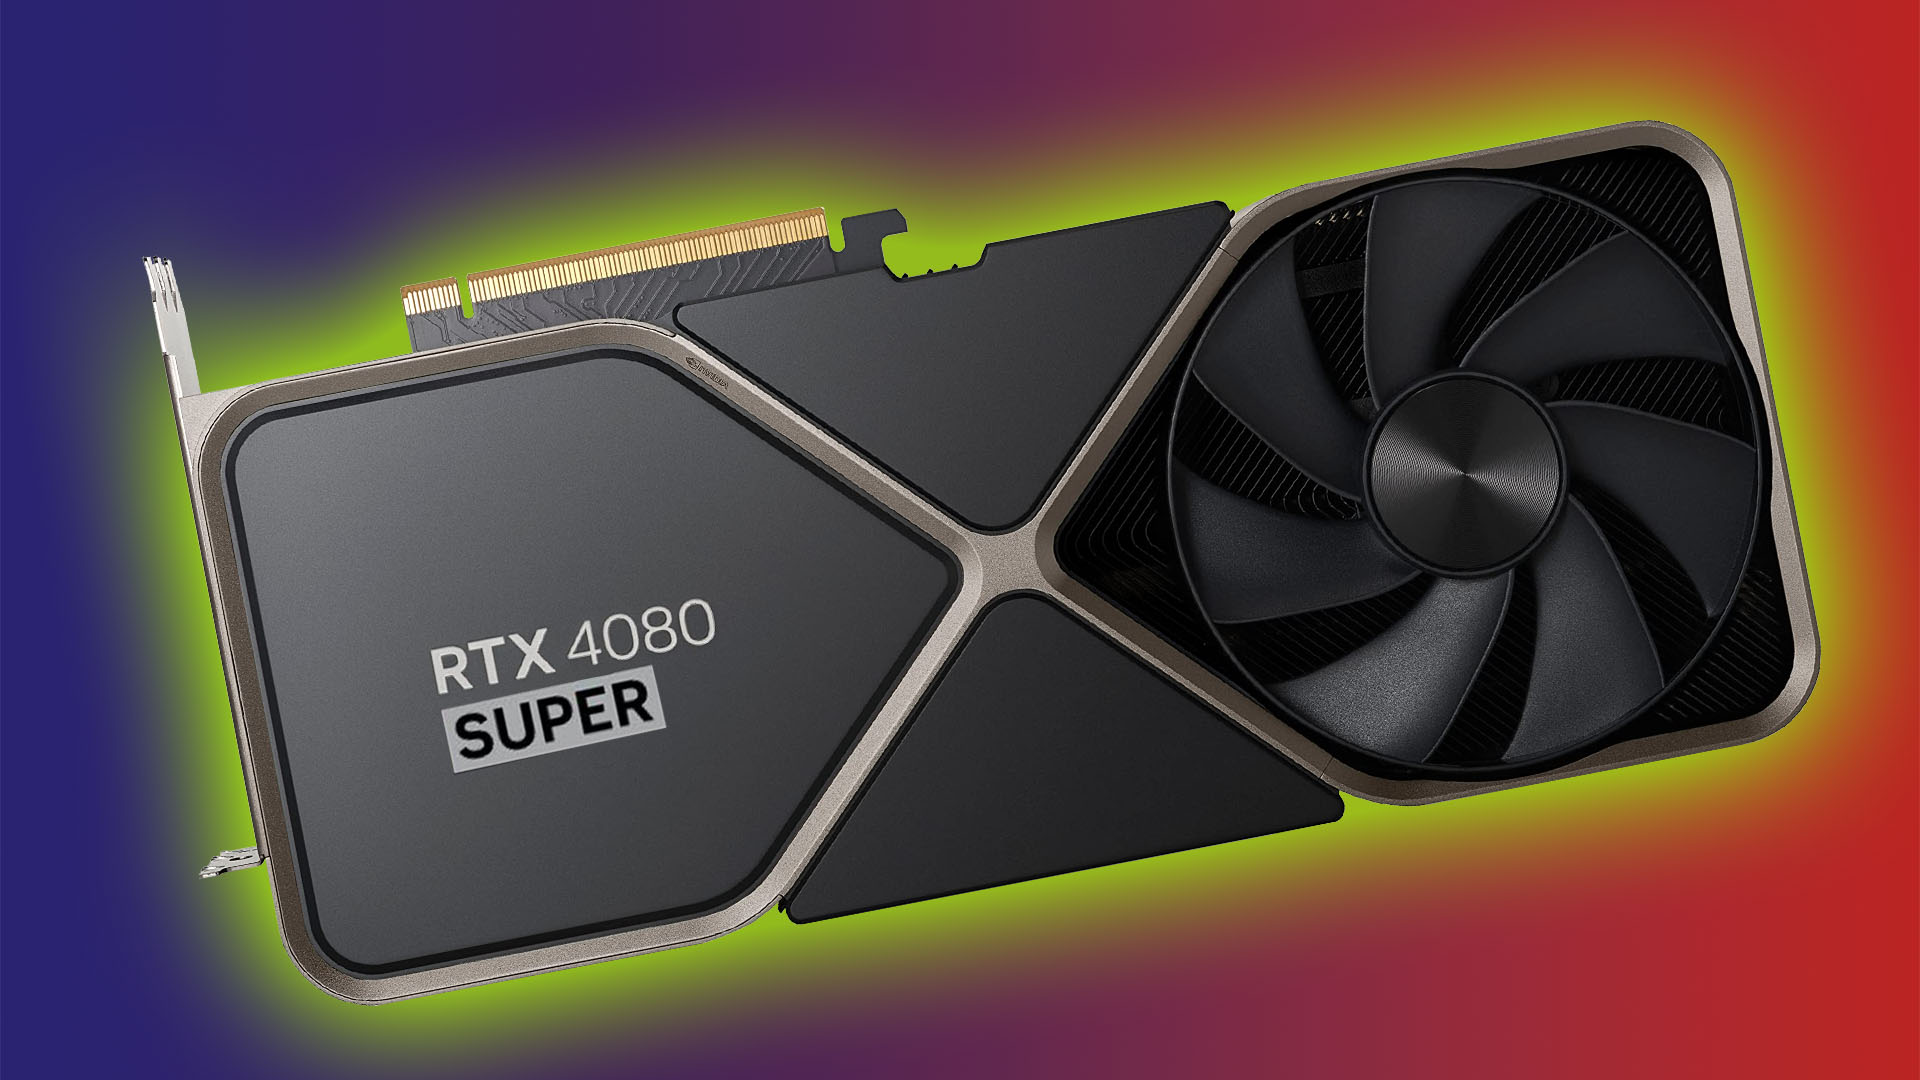 Nvidia RTX 4080 Super could fix one of the biggest complaints